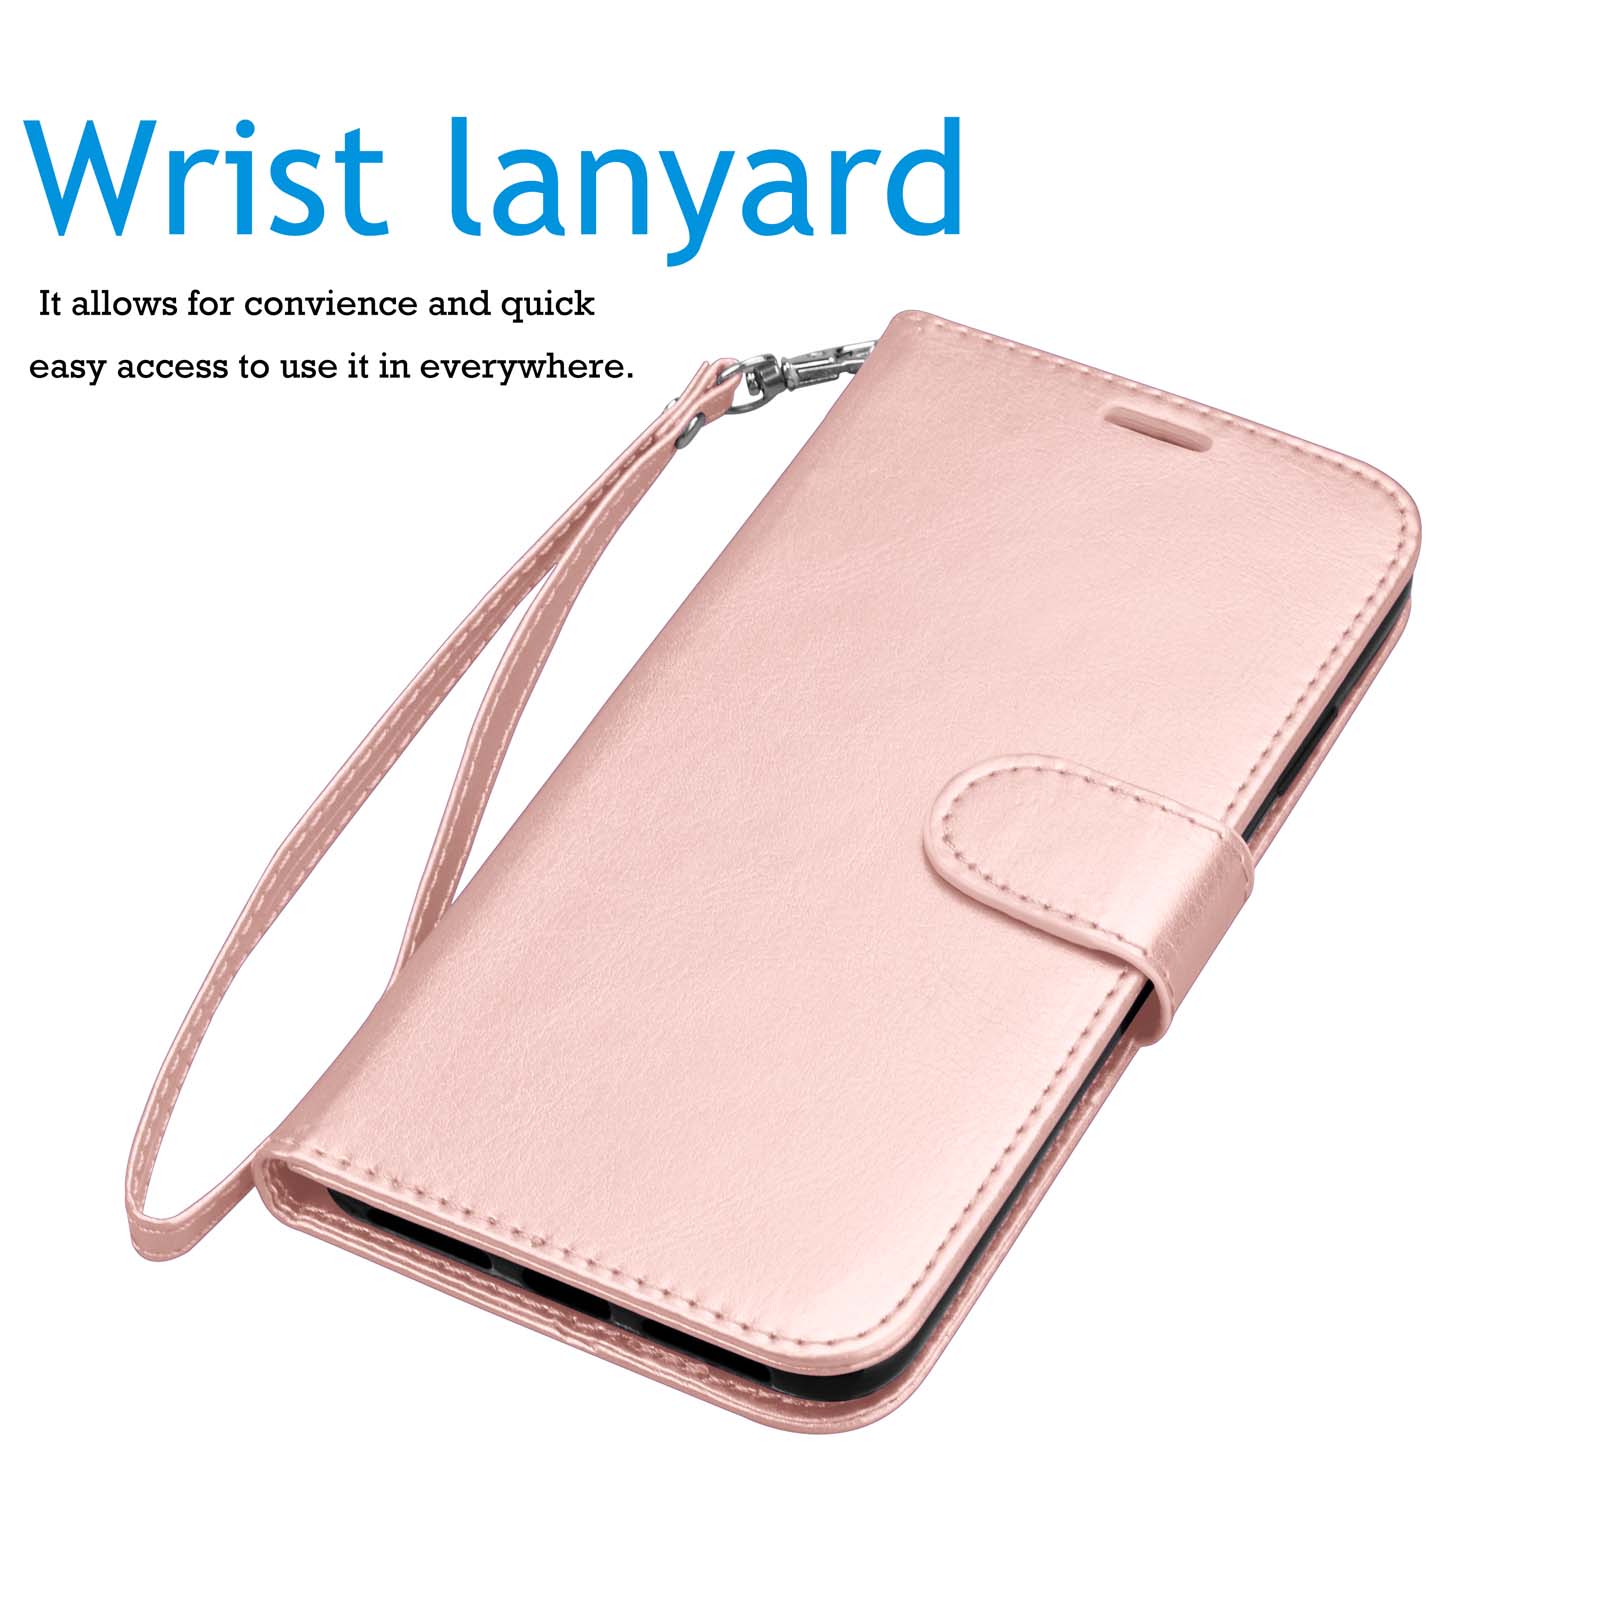 Tekcoo Galaxy S10 / S10 Plus / S10E Wallet Case, for Galaxy S10 / S10+ / S10e Case, Tekcoo [Rose Gold] PU Leather [3 Card Slots] ID Credit Flip Cover [Kickstand] Cover & Wrist Strap - image 5 of 5